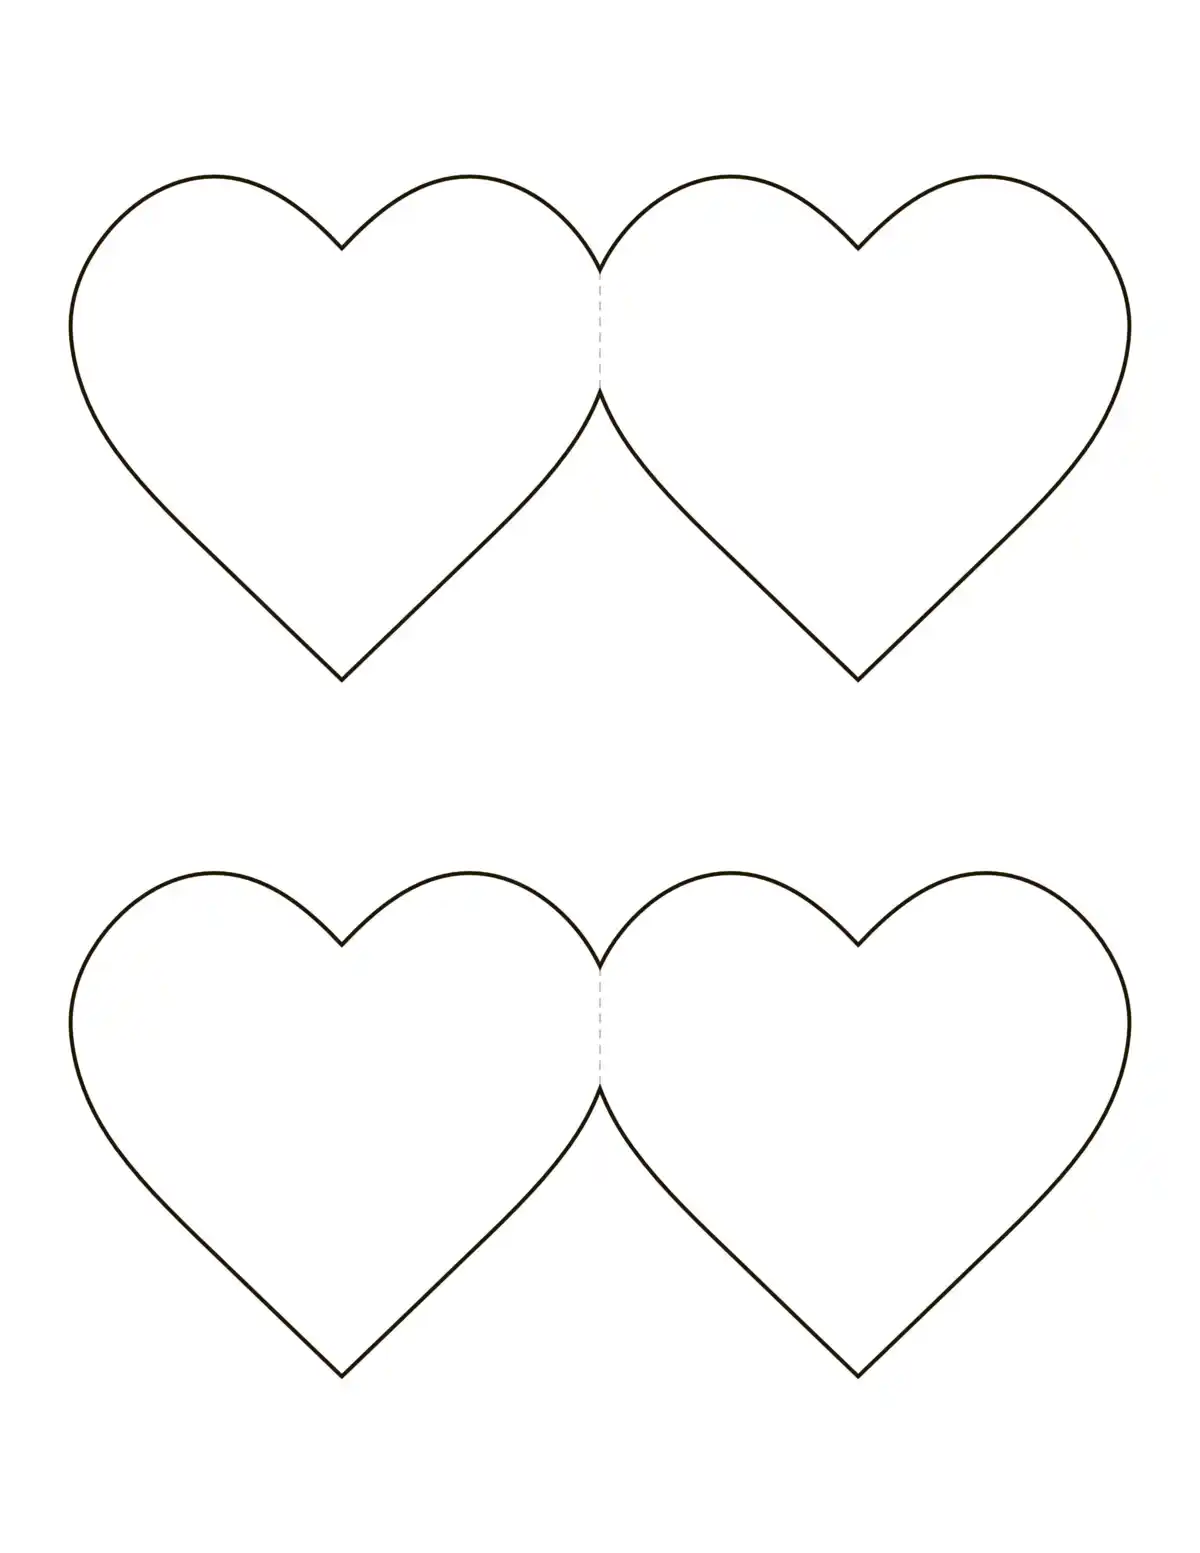 Free Coloring Pages PDF, Heart Card With Side Hinge Medium Coloring Pages Pdf